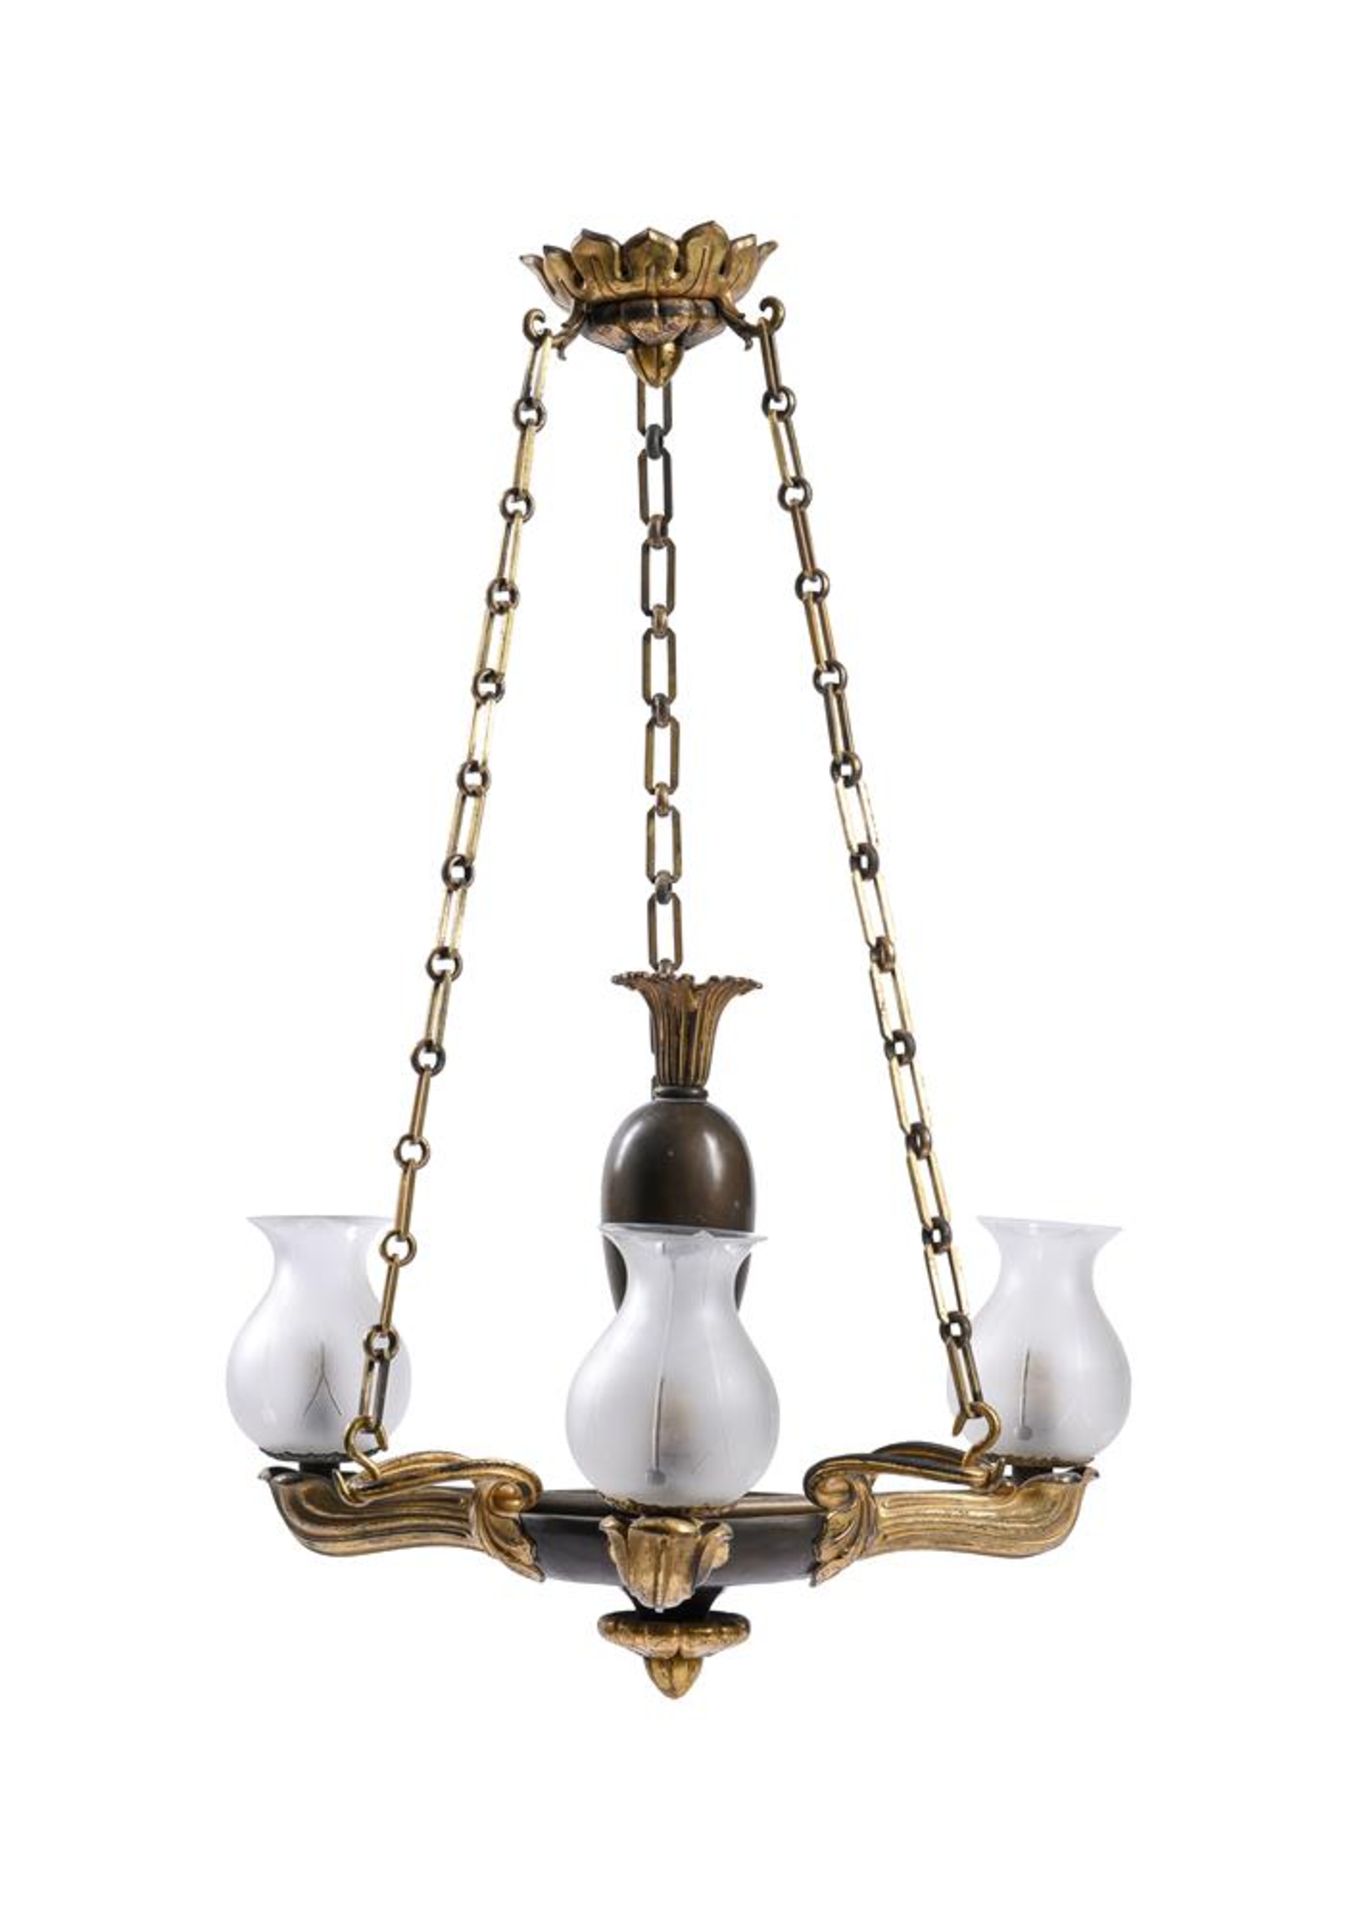 A GILT AND PATINATED METAL HANGING LIGHT IN REGENCY STYLE - Image 2 of 3